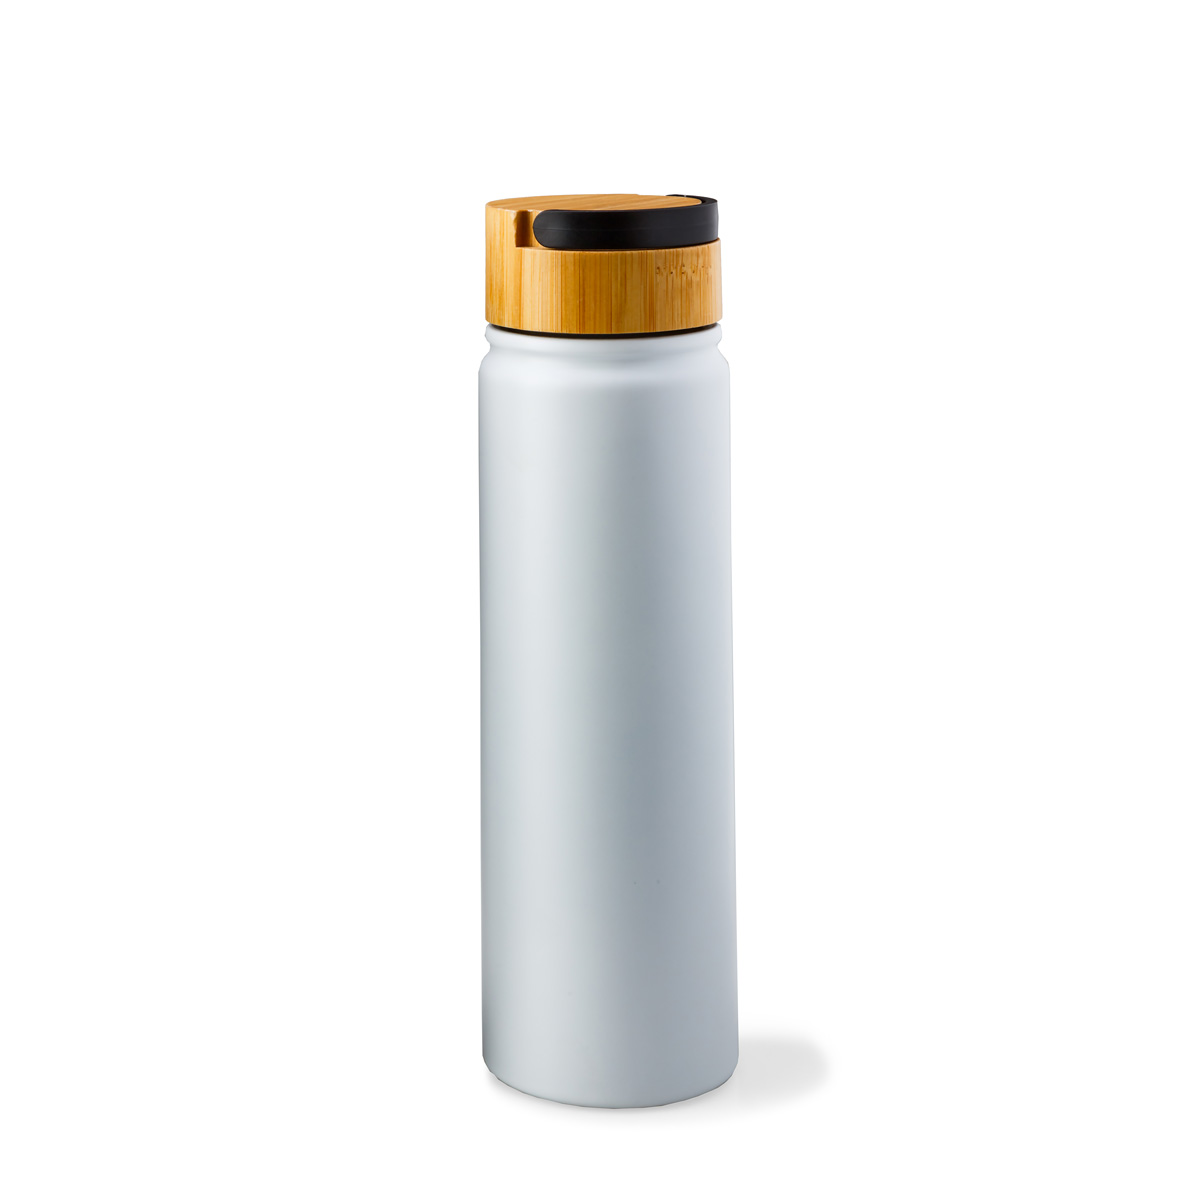 Jeits 600ml Water Bottle Product Image